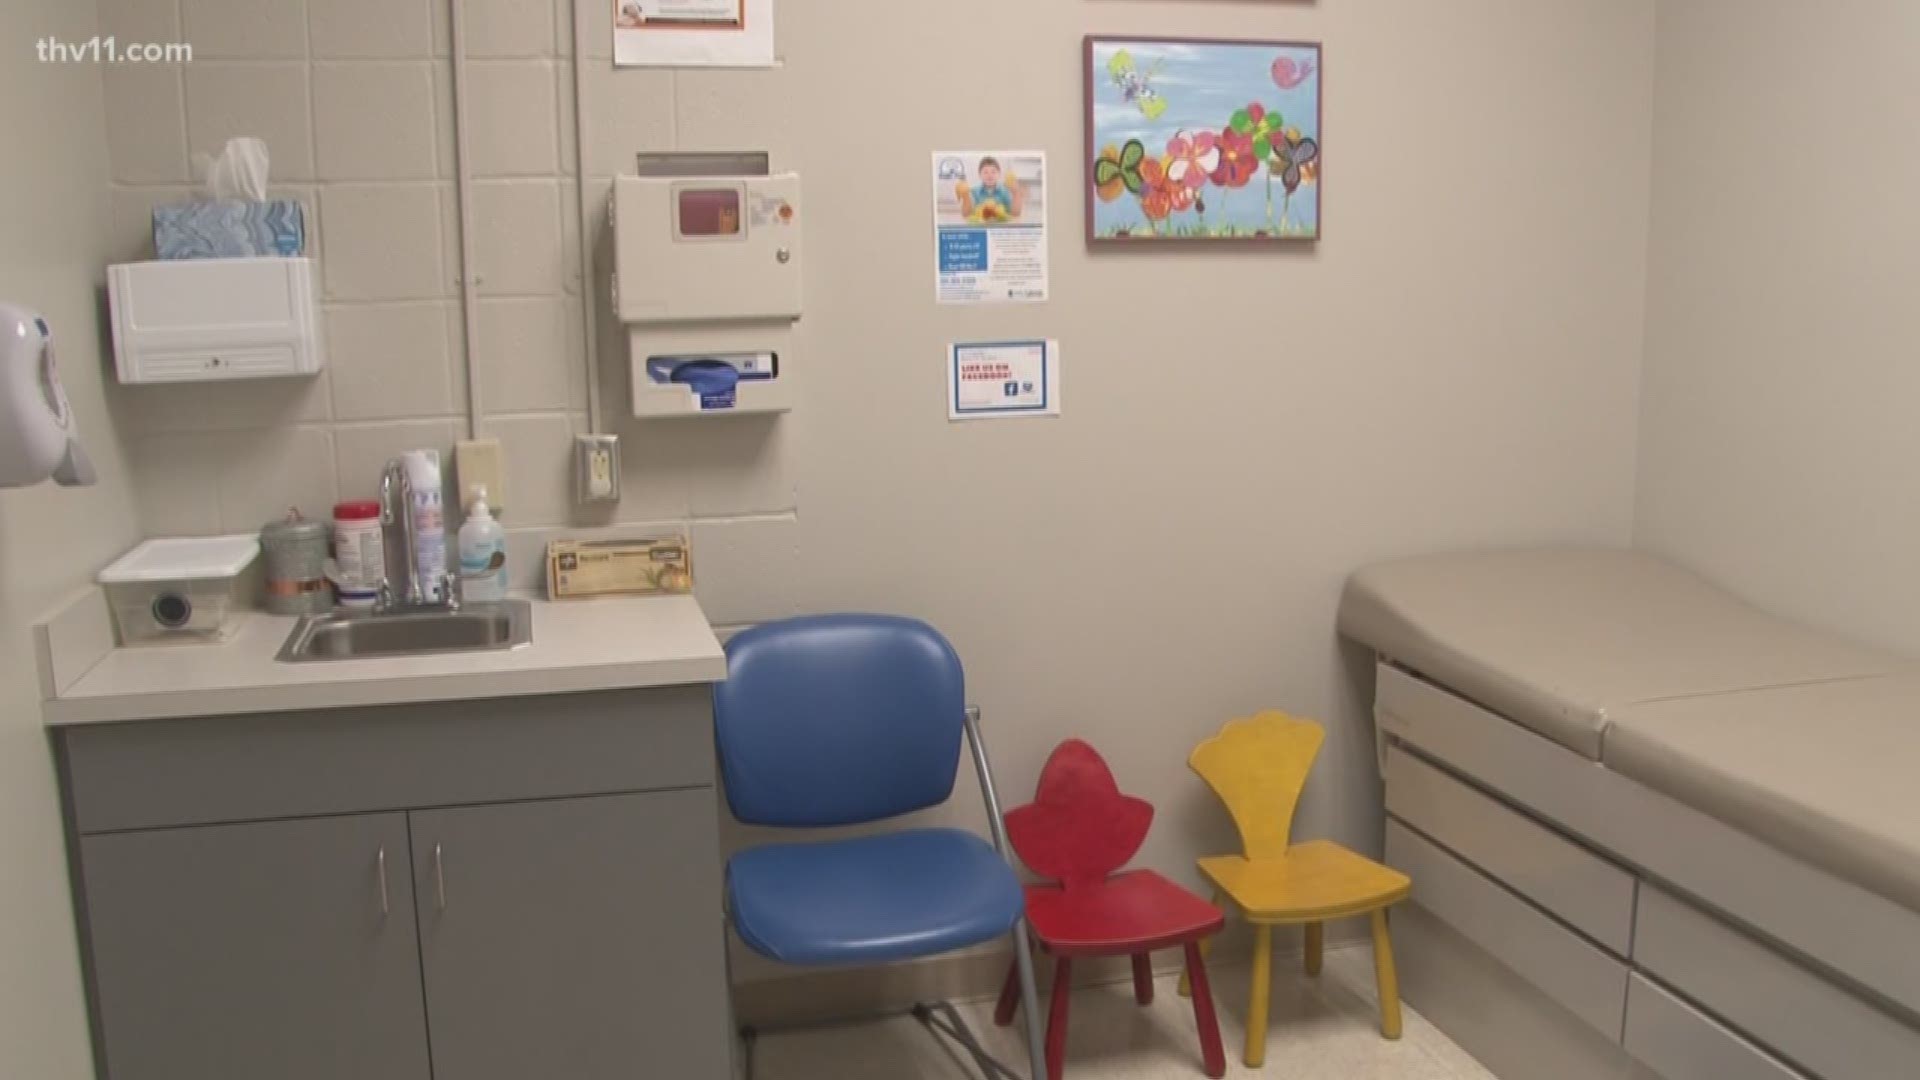 With February being National School-based Health Clinic Awareness month, the LRSD and Children's Hospital partnered to host a tour of the clinic.